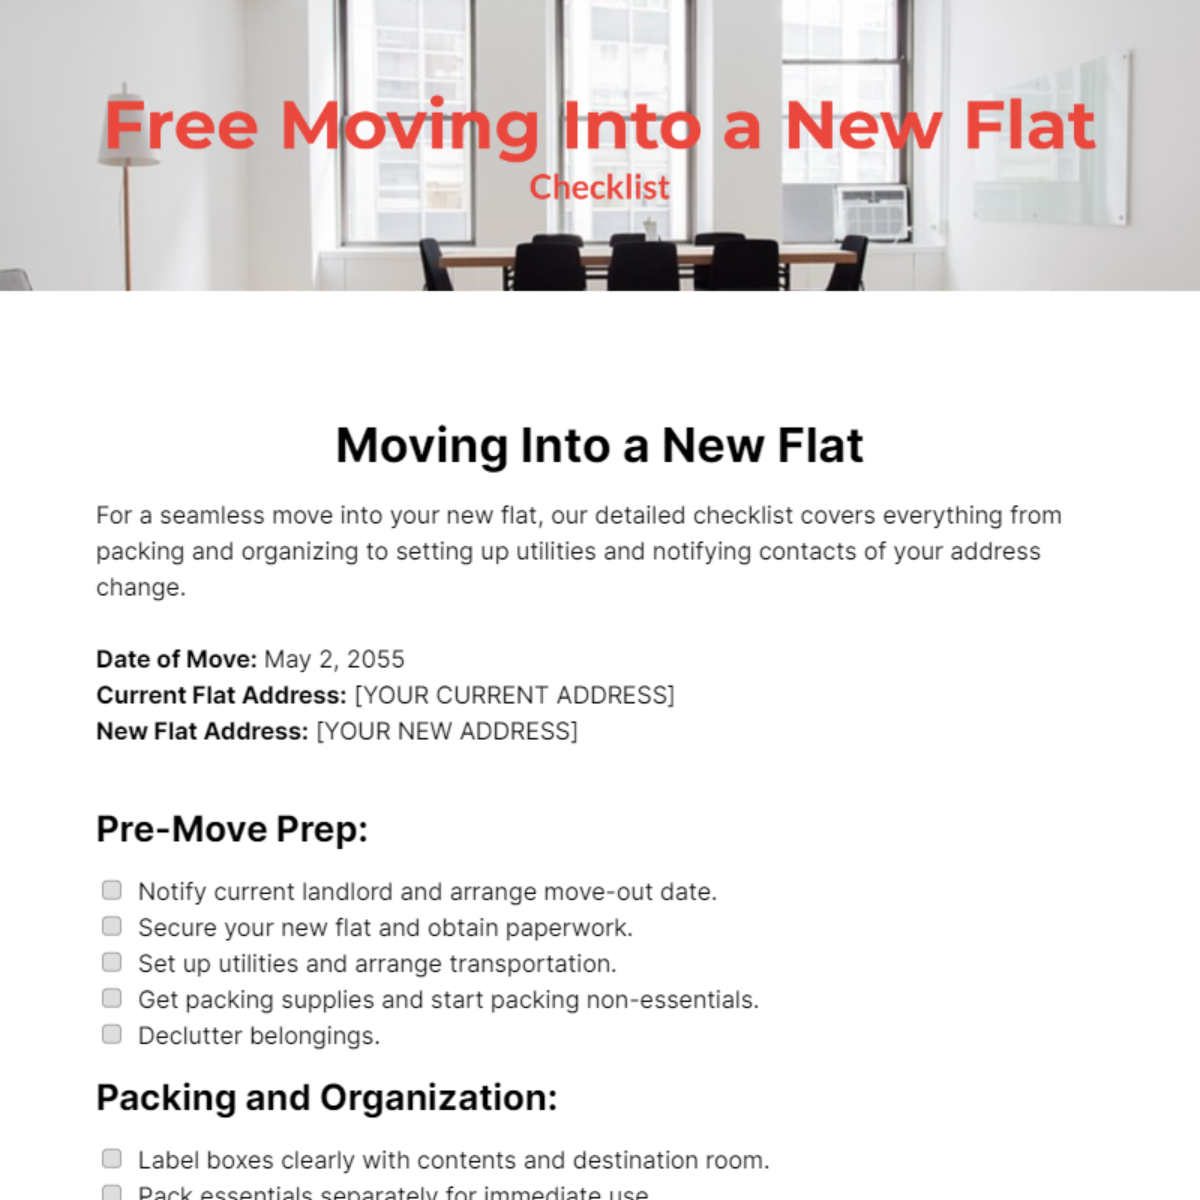 Free Moving Into a New Flat Checklist Template